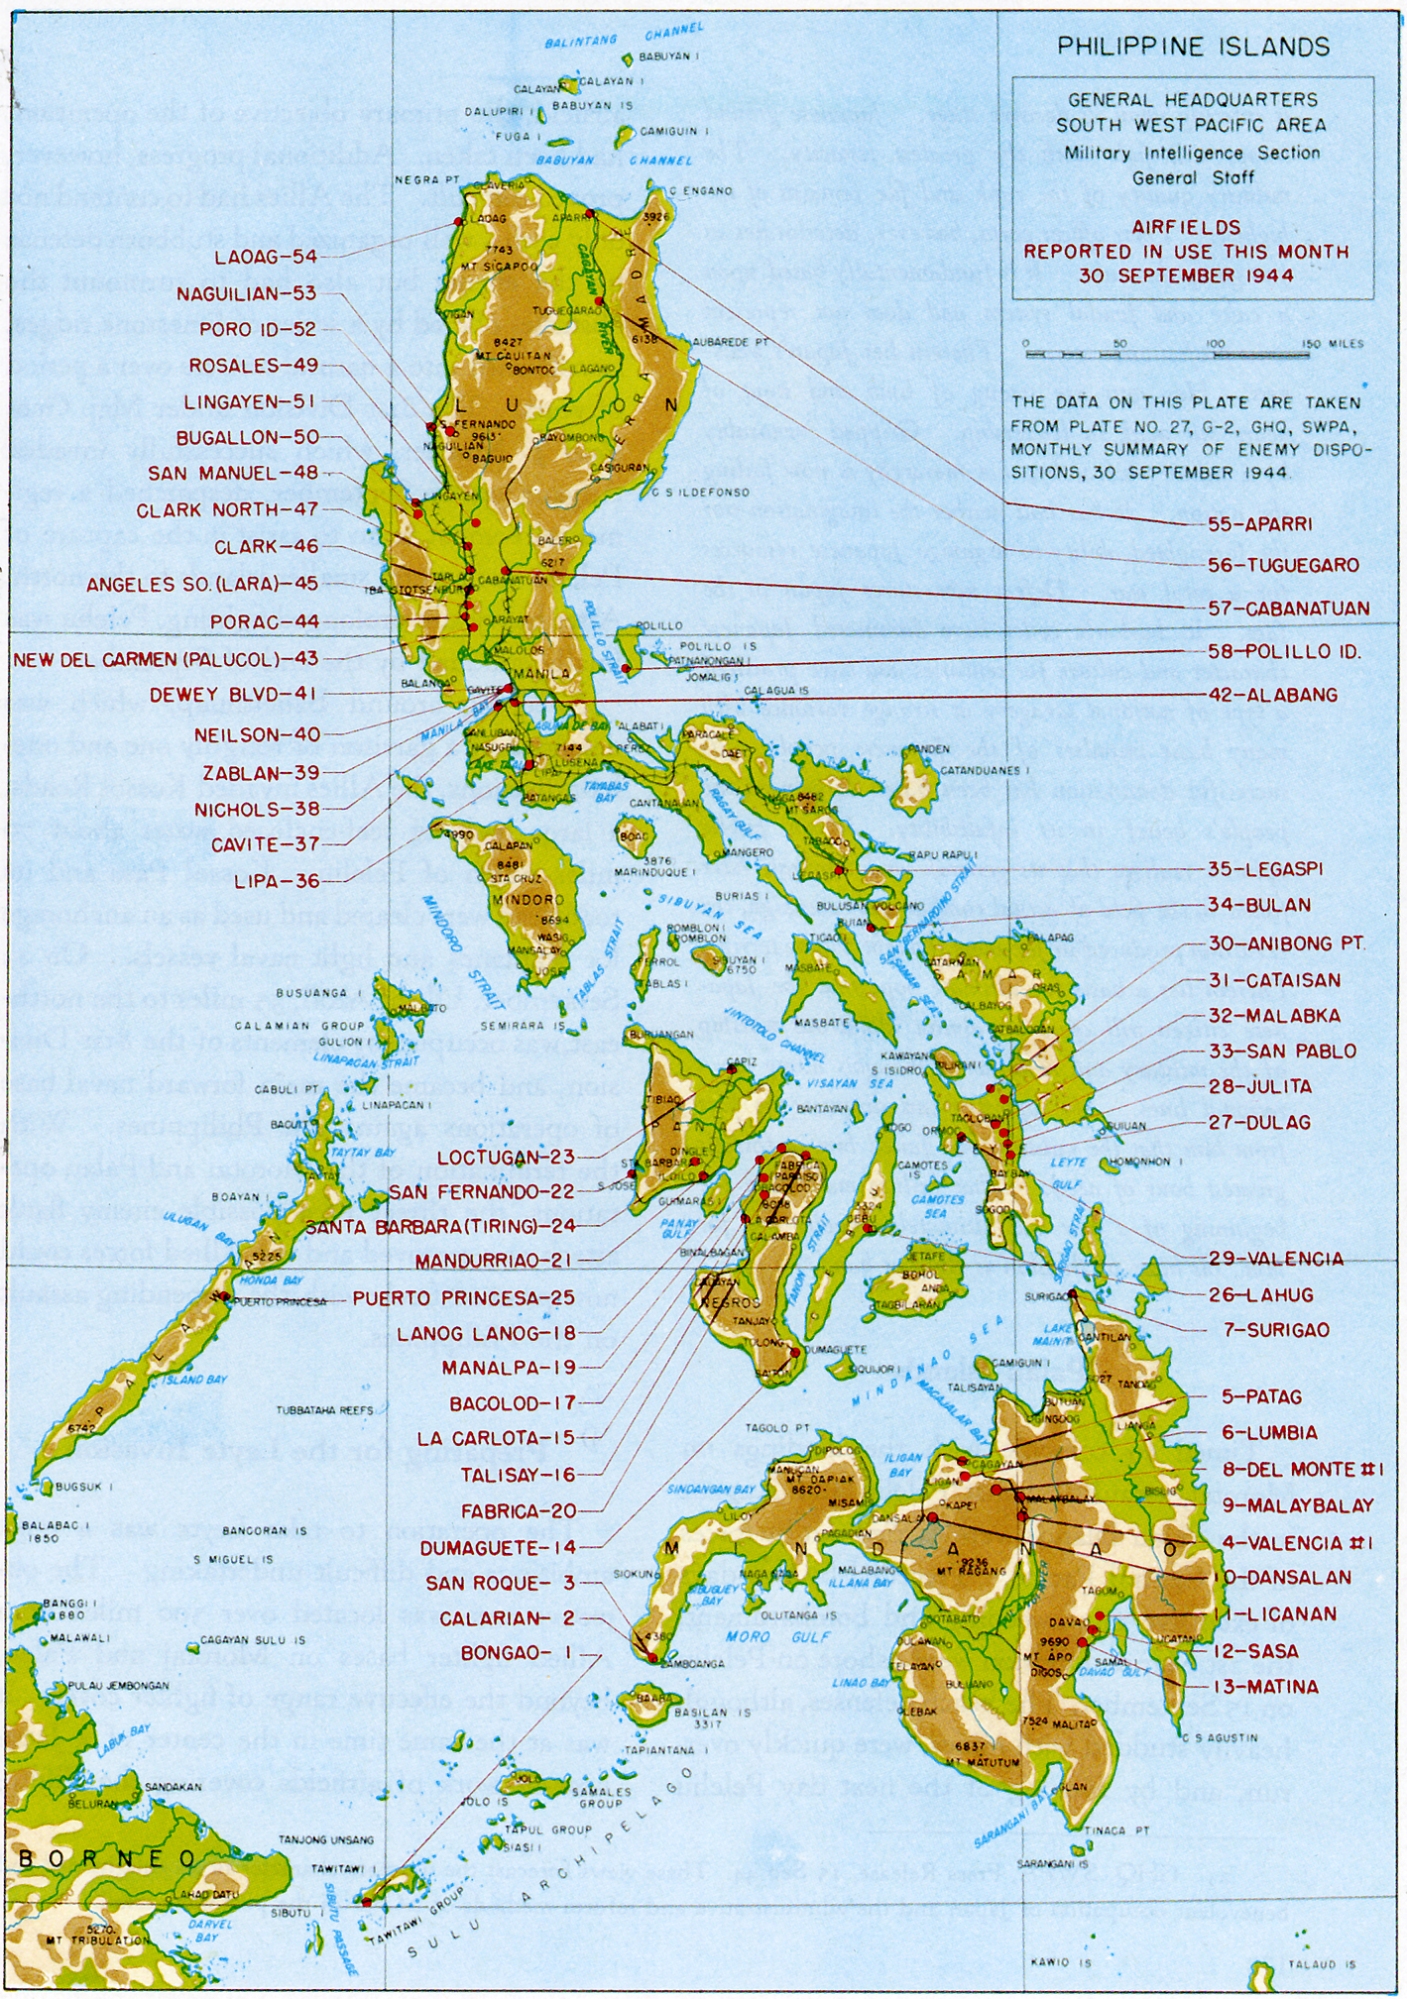 The Philippines 1944 Japanese Preparations and Plans II